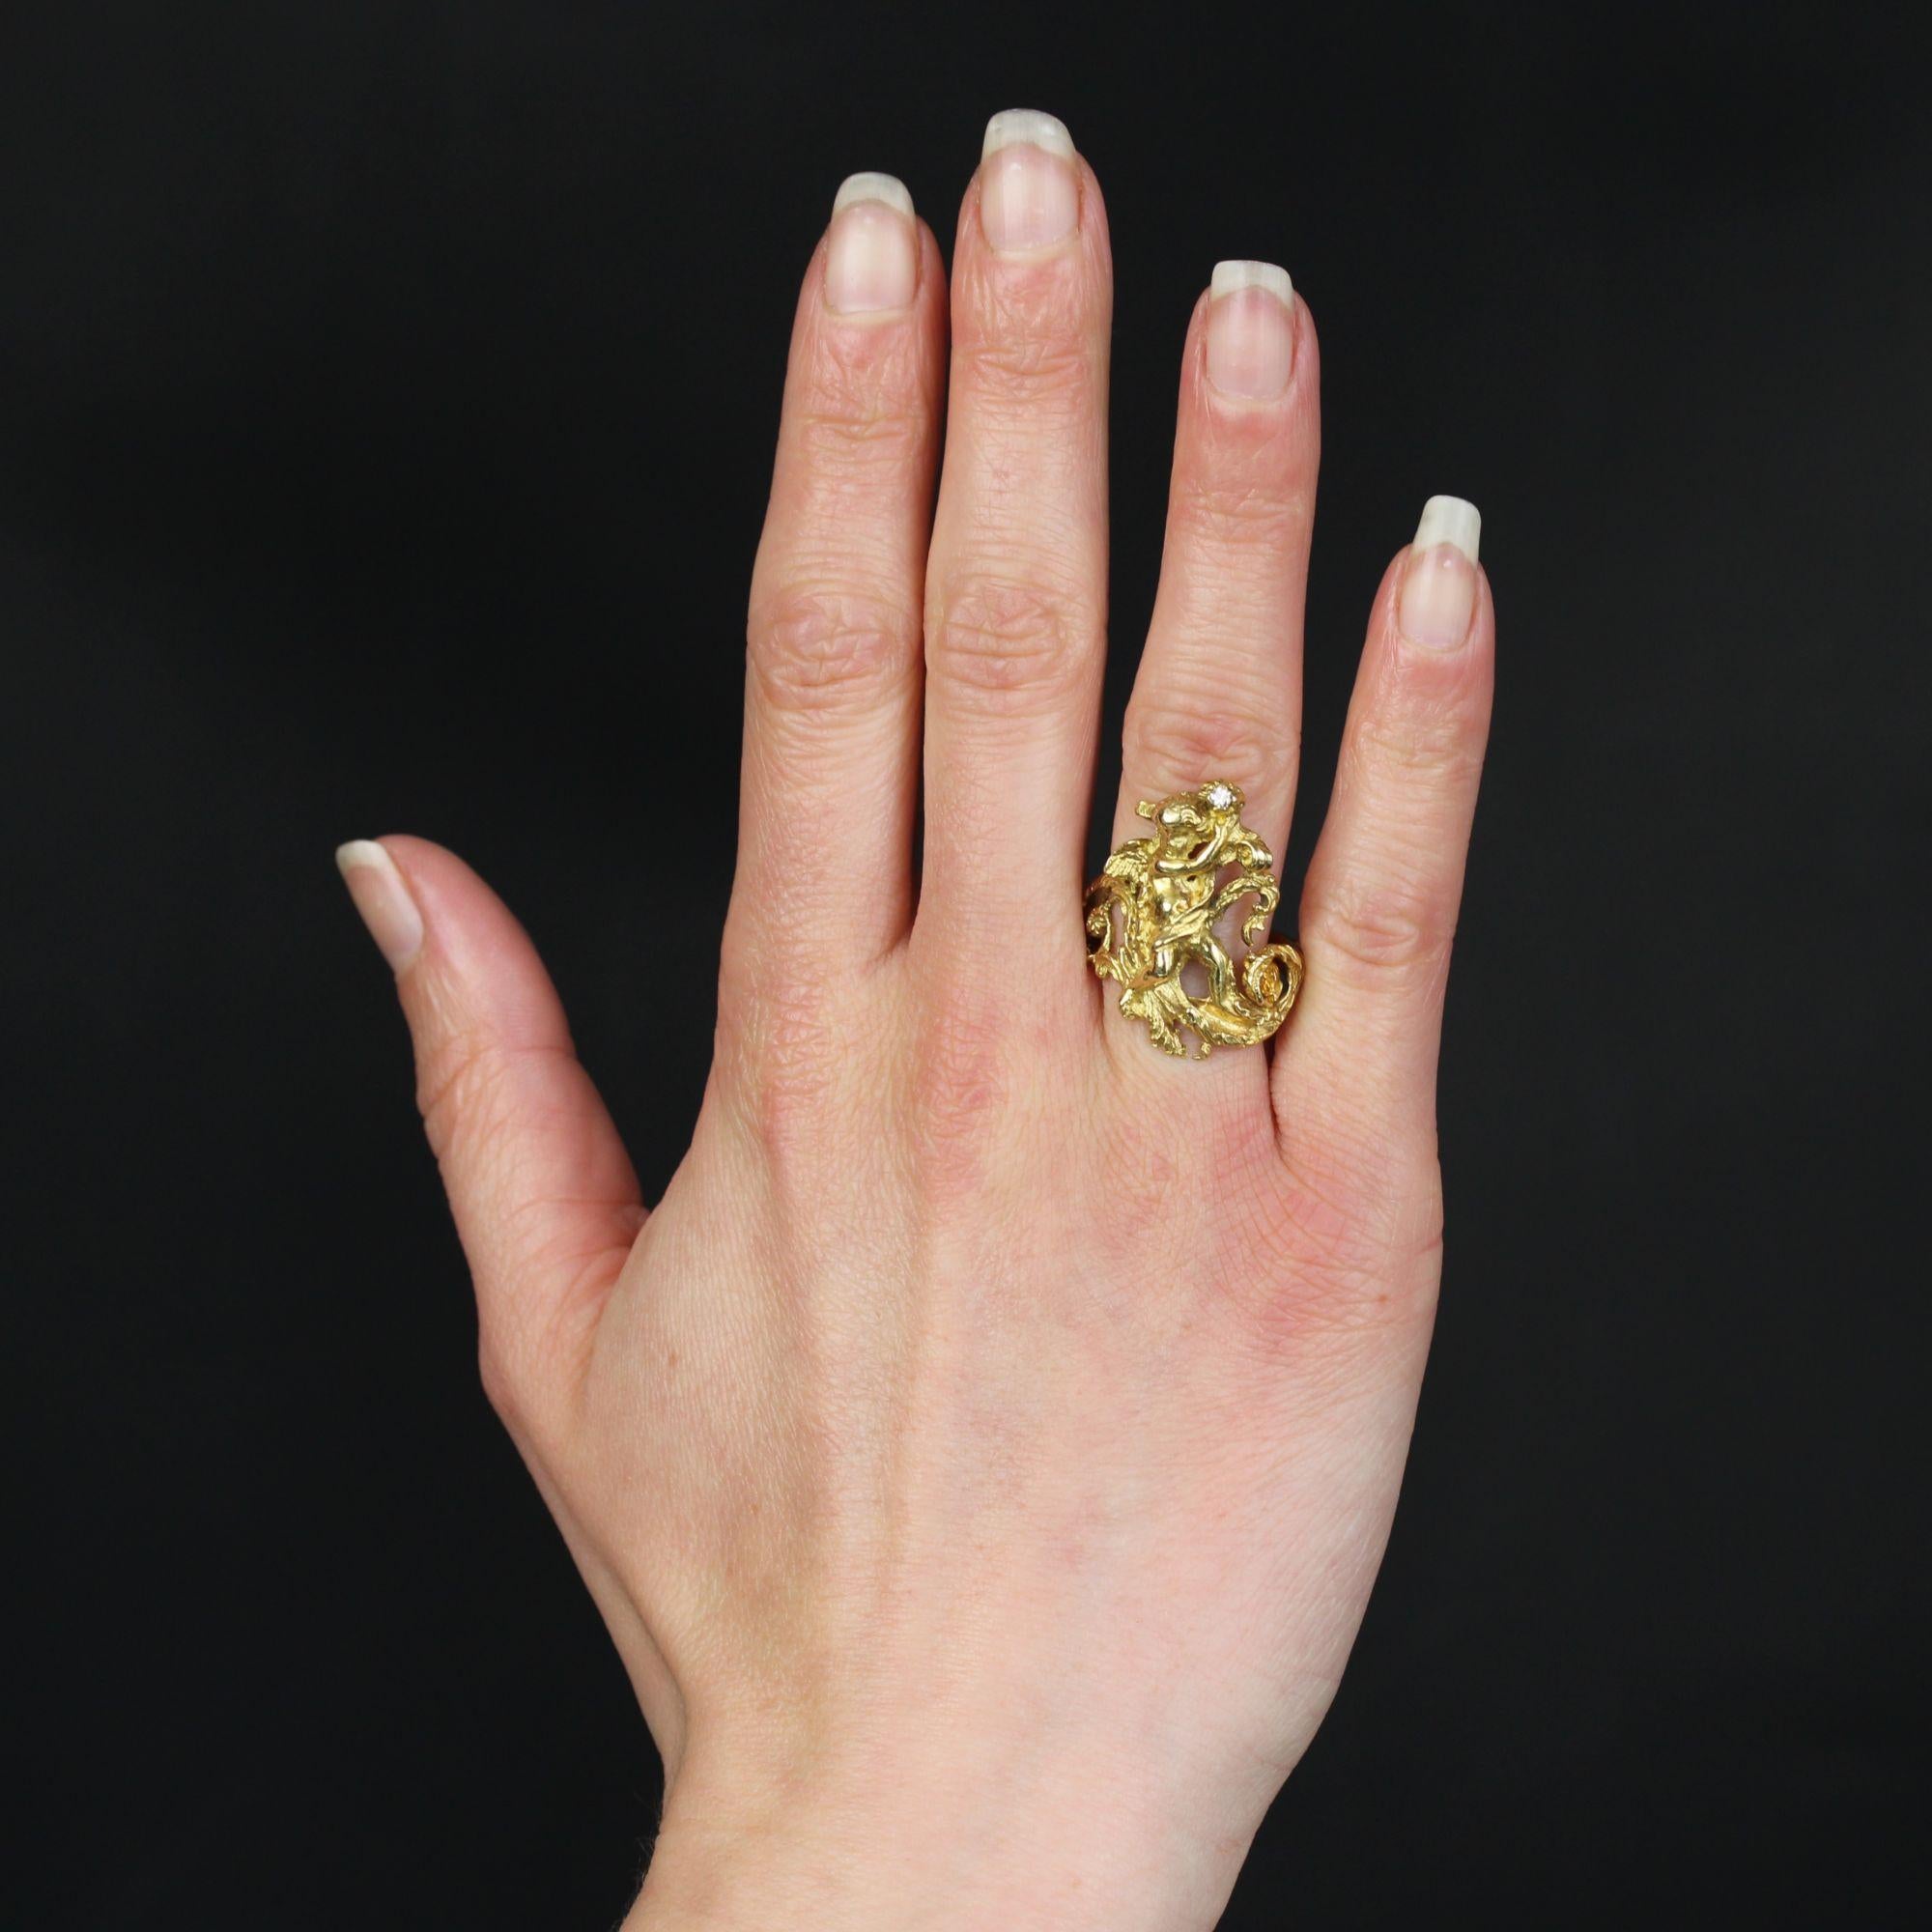 Ring in 18 karat yellow gold.
An important antique ring, its setting is engraved all around and on top with plant motifs, arabesques and an adorable little angel holding a small brilliant-cut diamond in her hands above her head. The whole is